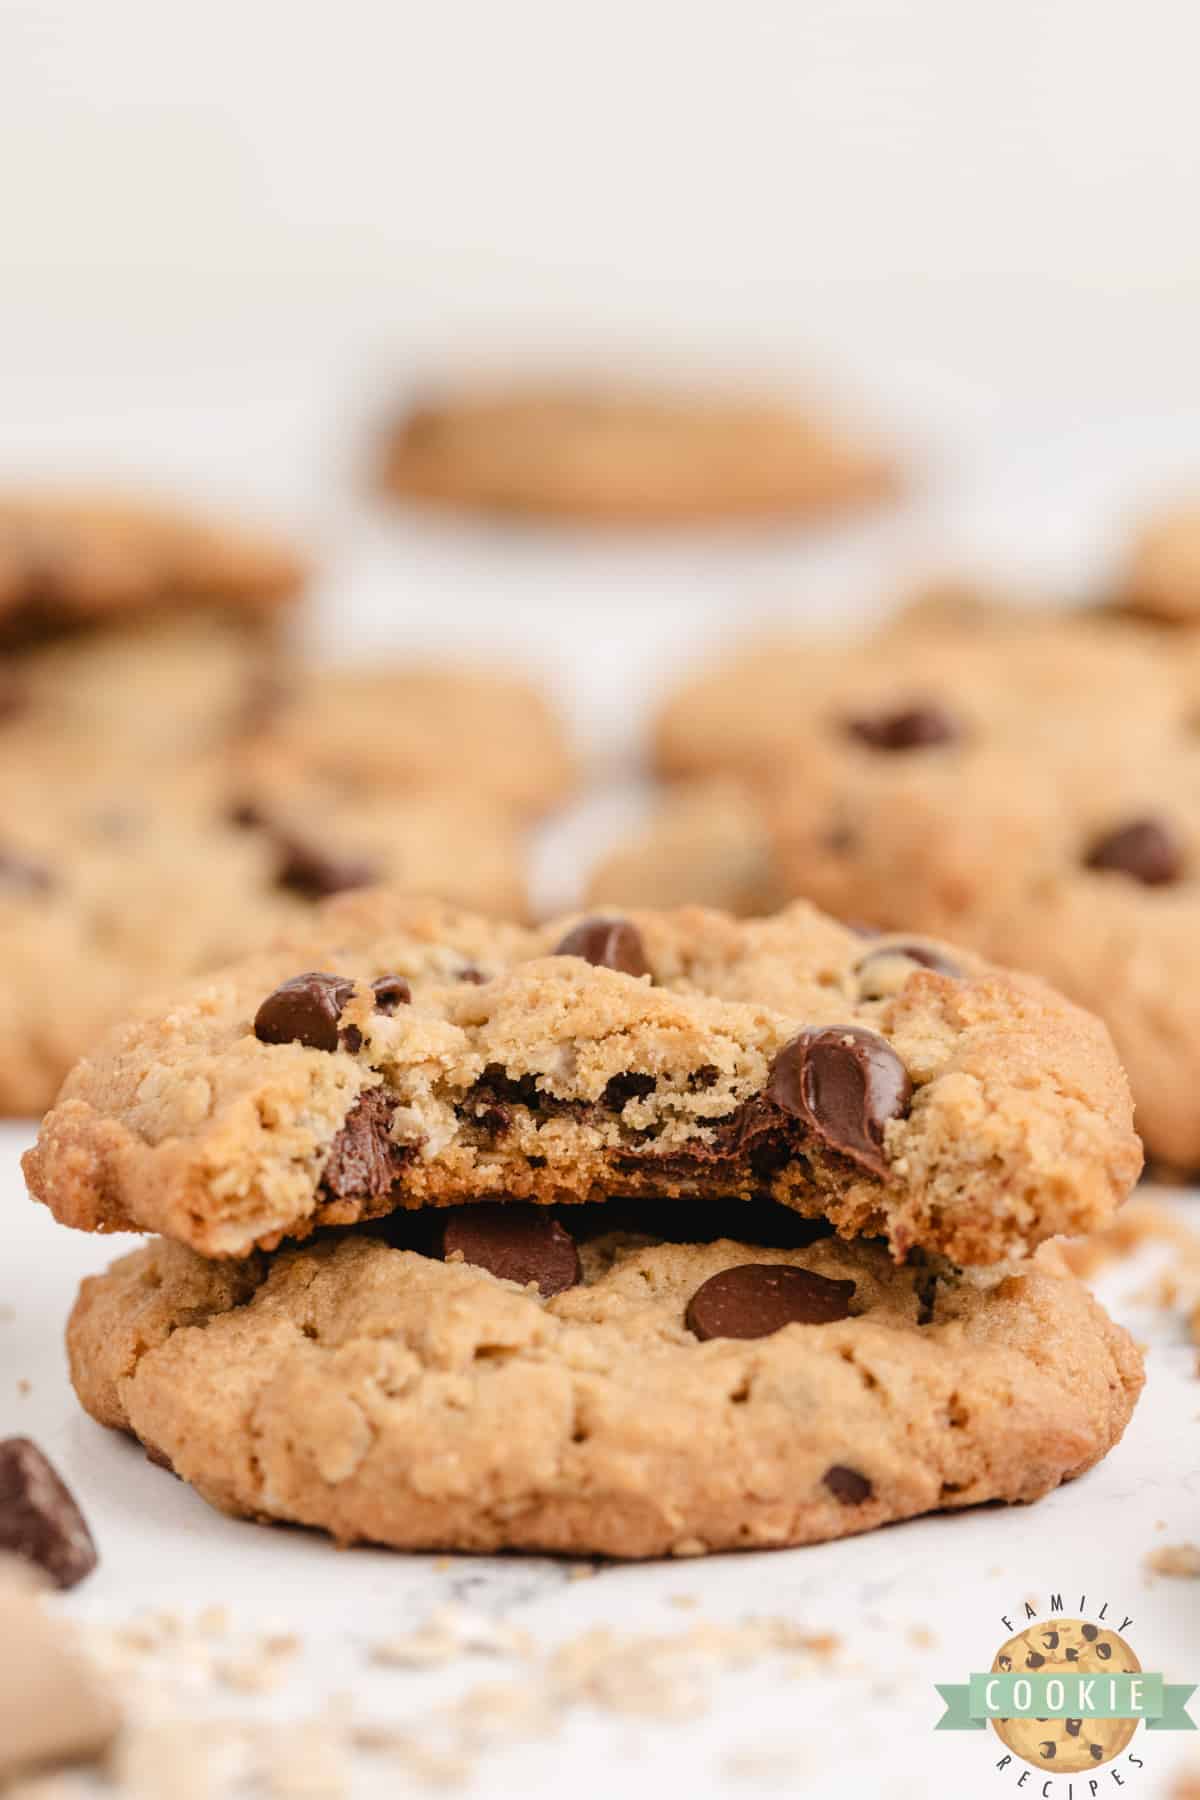 Oatmeal cookies made with peanut butter and chocolate chips. 